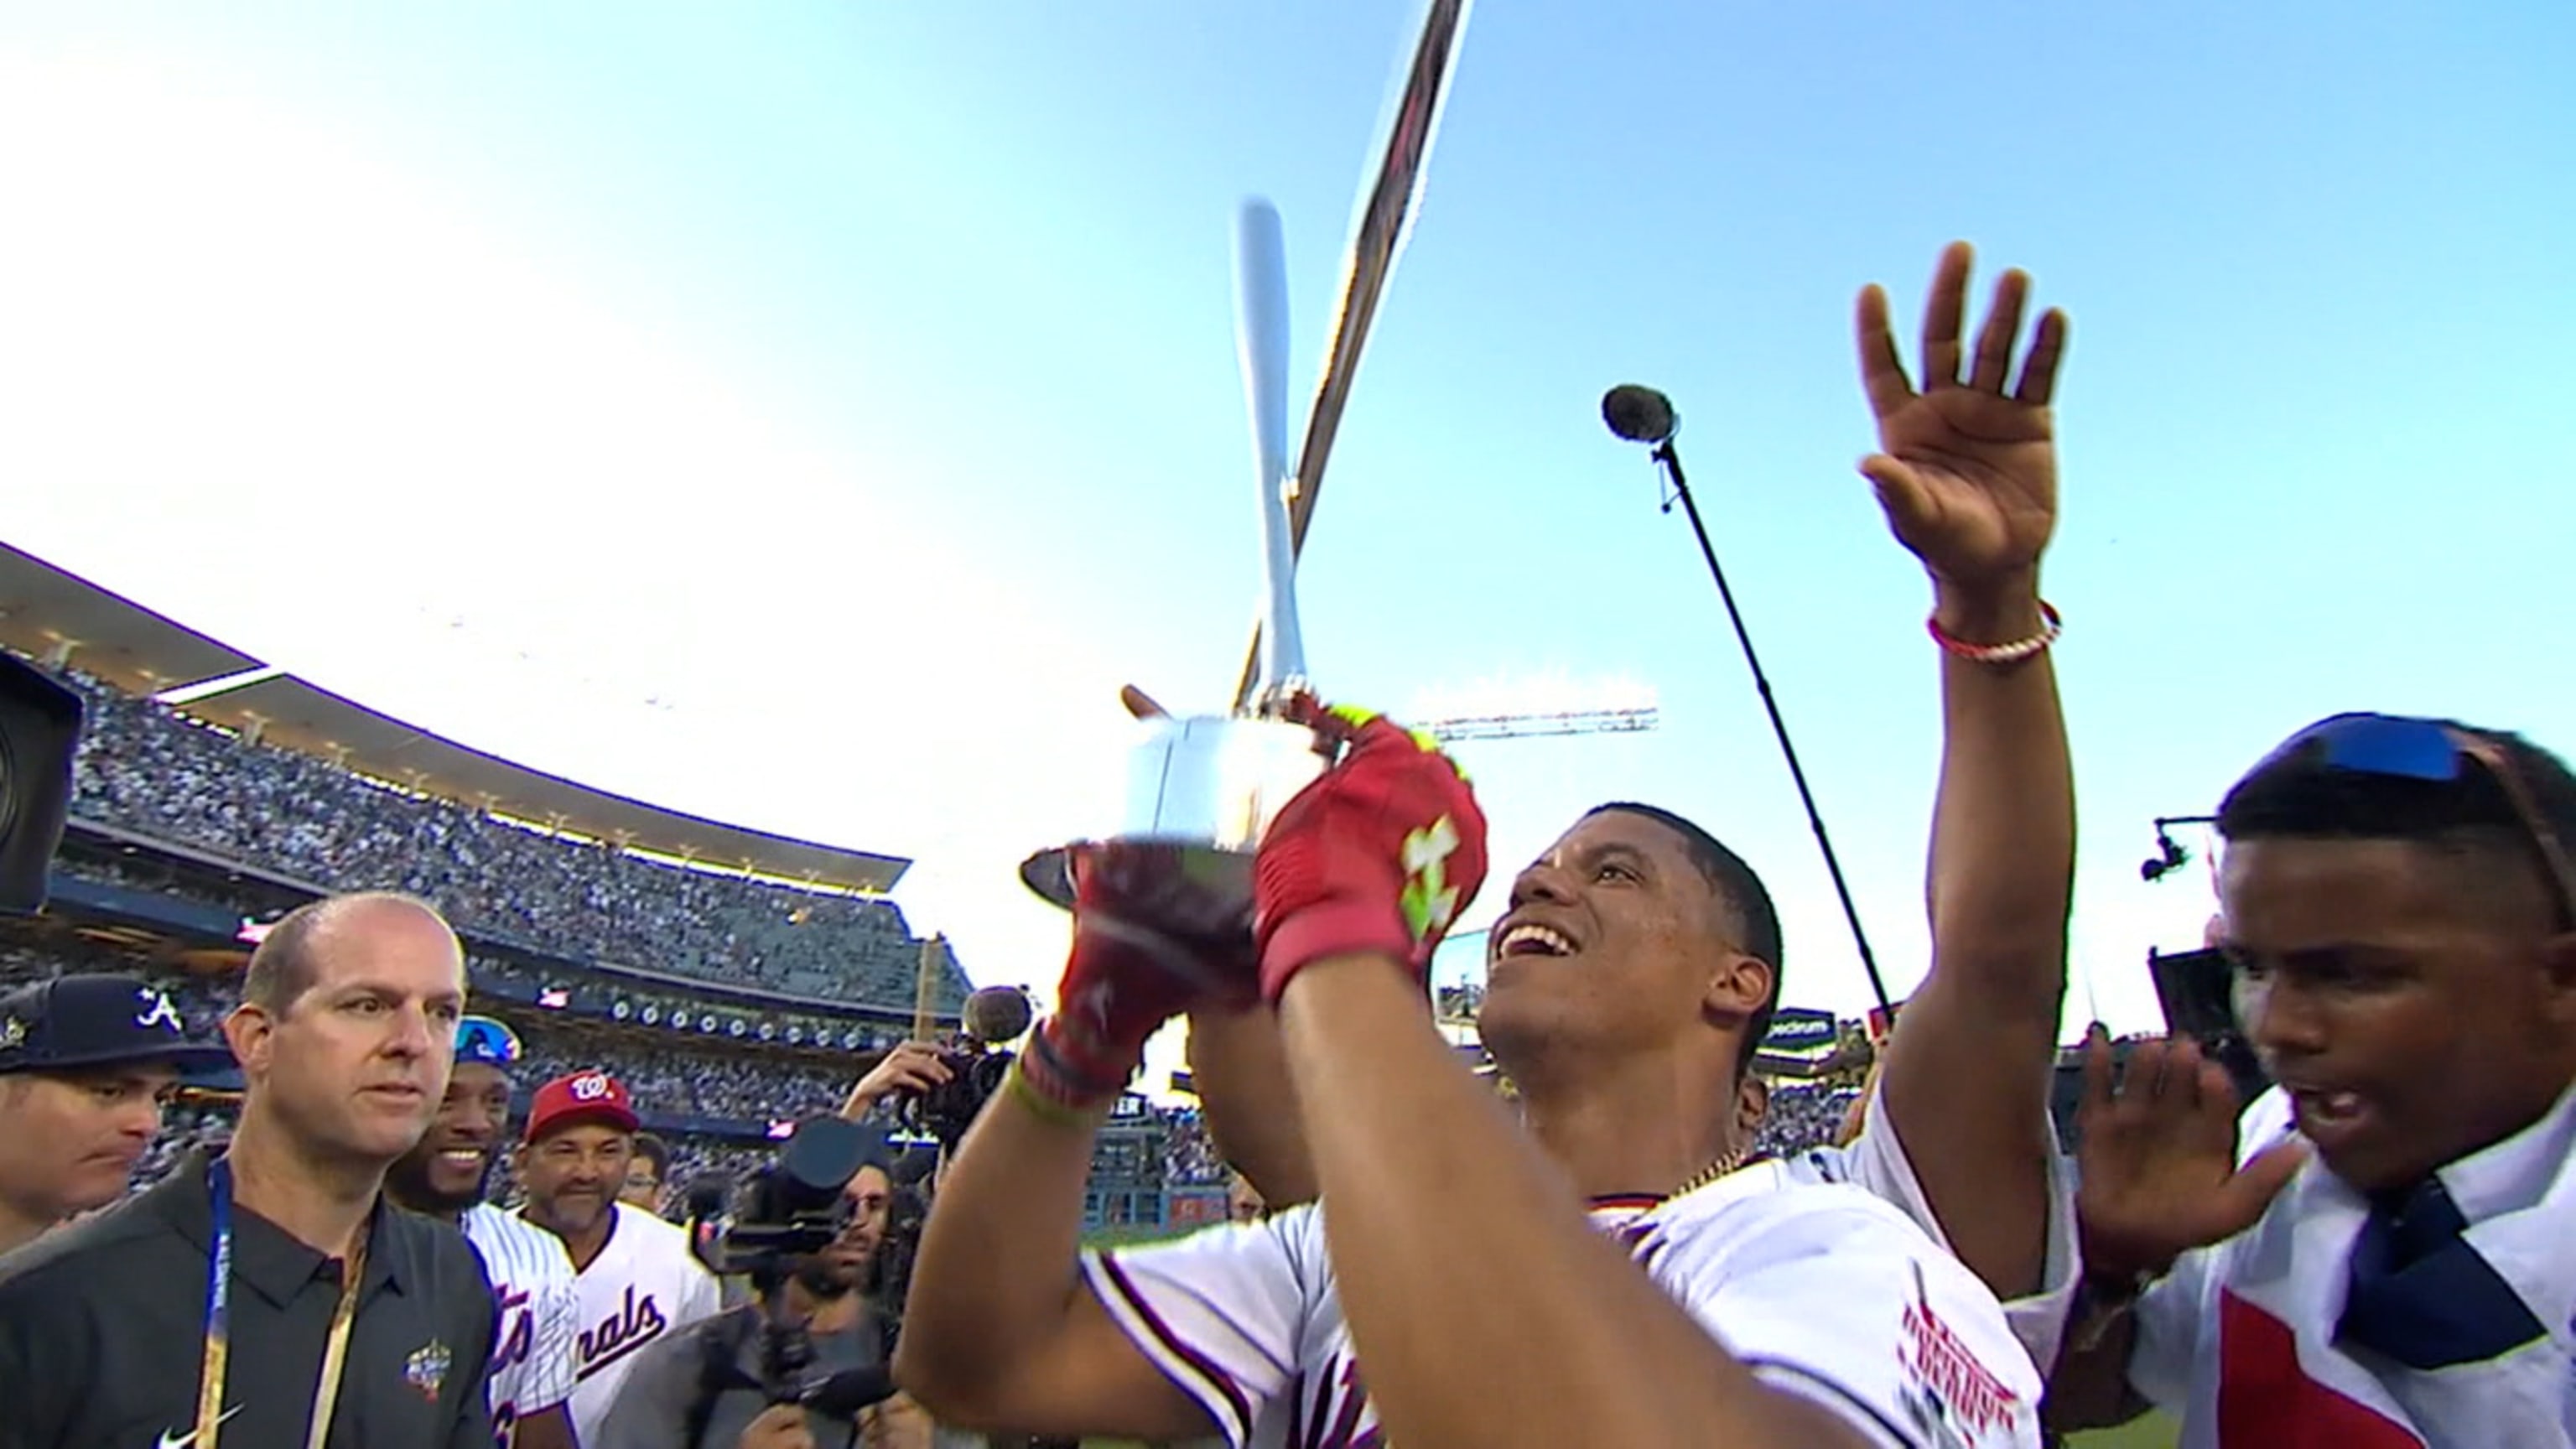 MLB: Who will win the Home Run Derby? - PayDirt